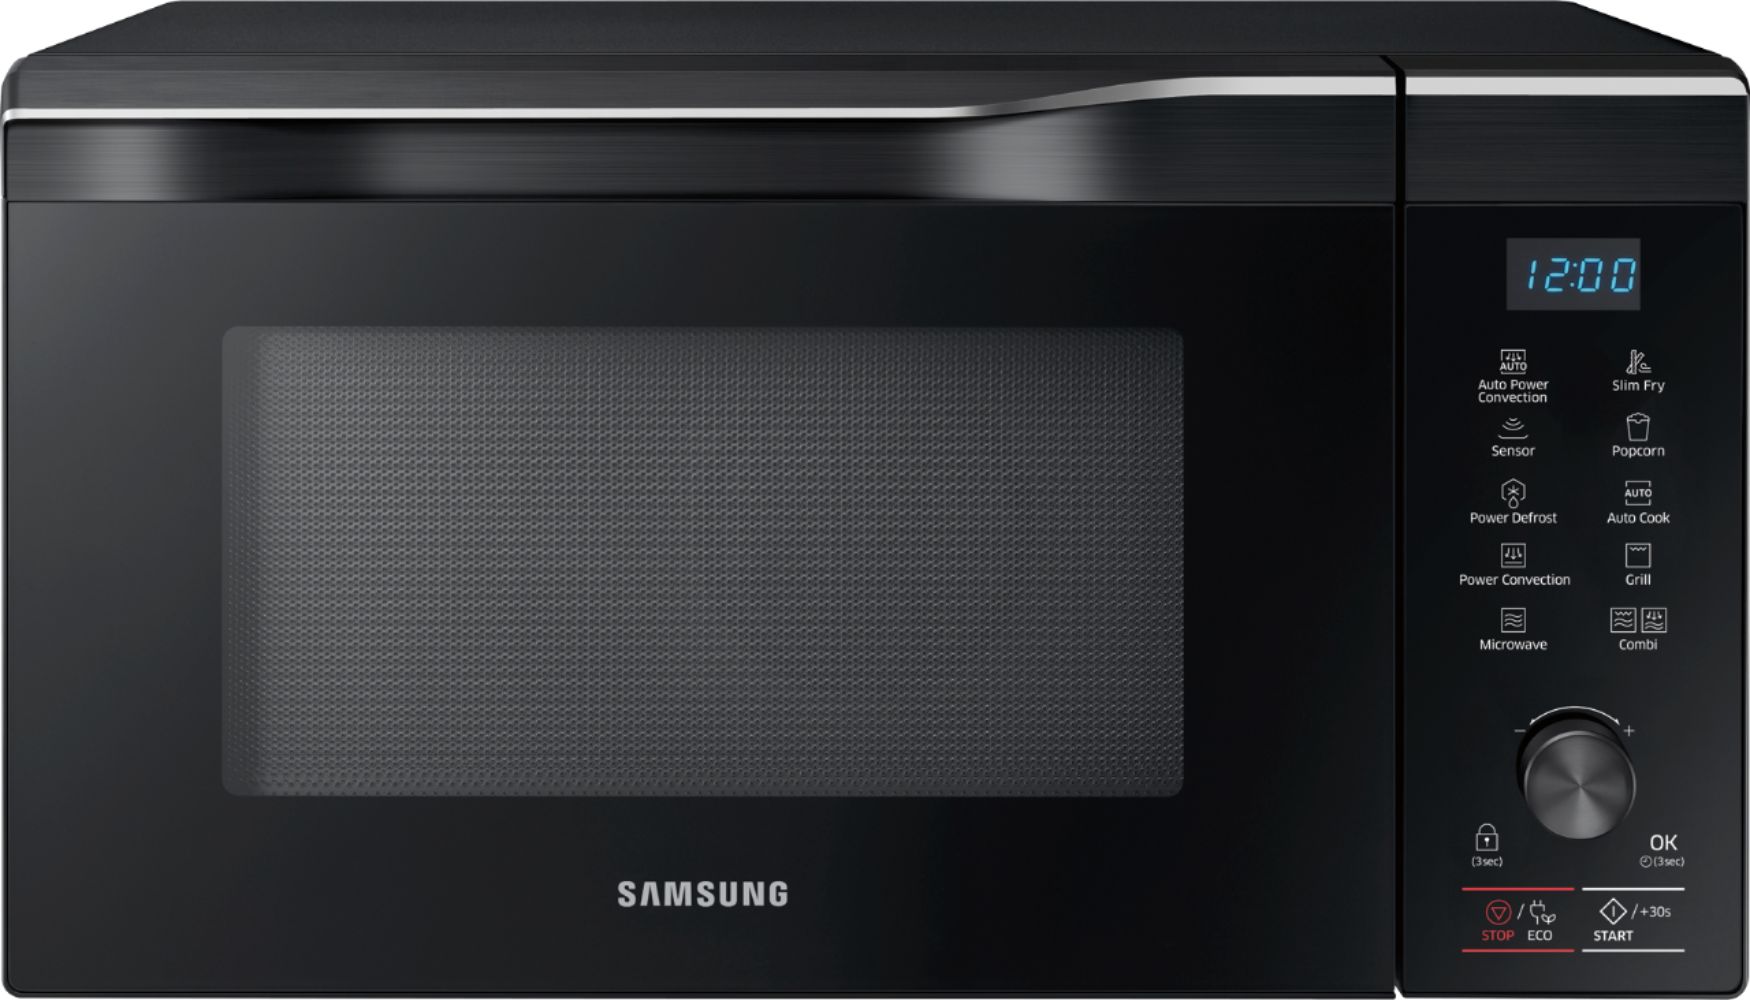 Samsung - 1.1 Cu. Ft. Countertop Convection Microwave with Sensor Cook and PowerGrill - Black stainless steel